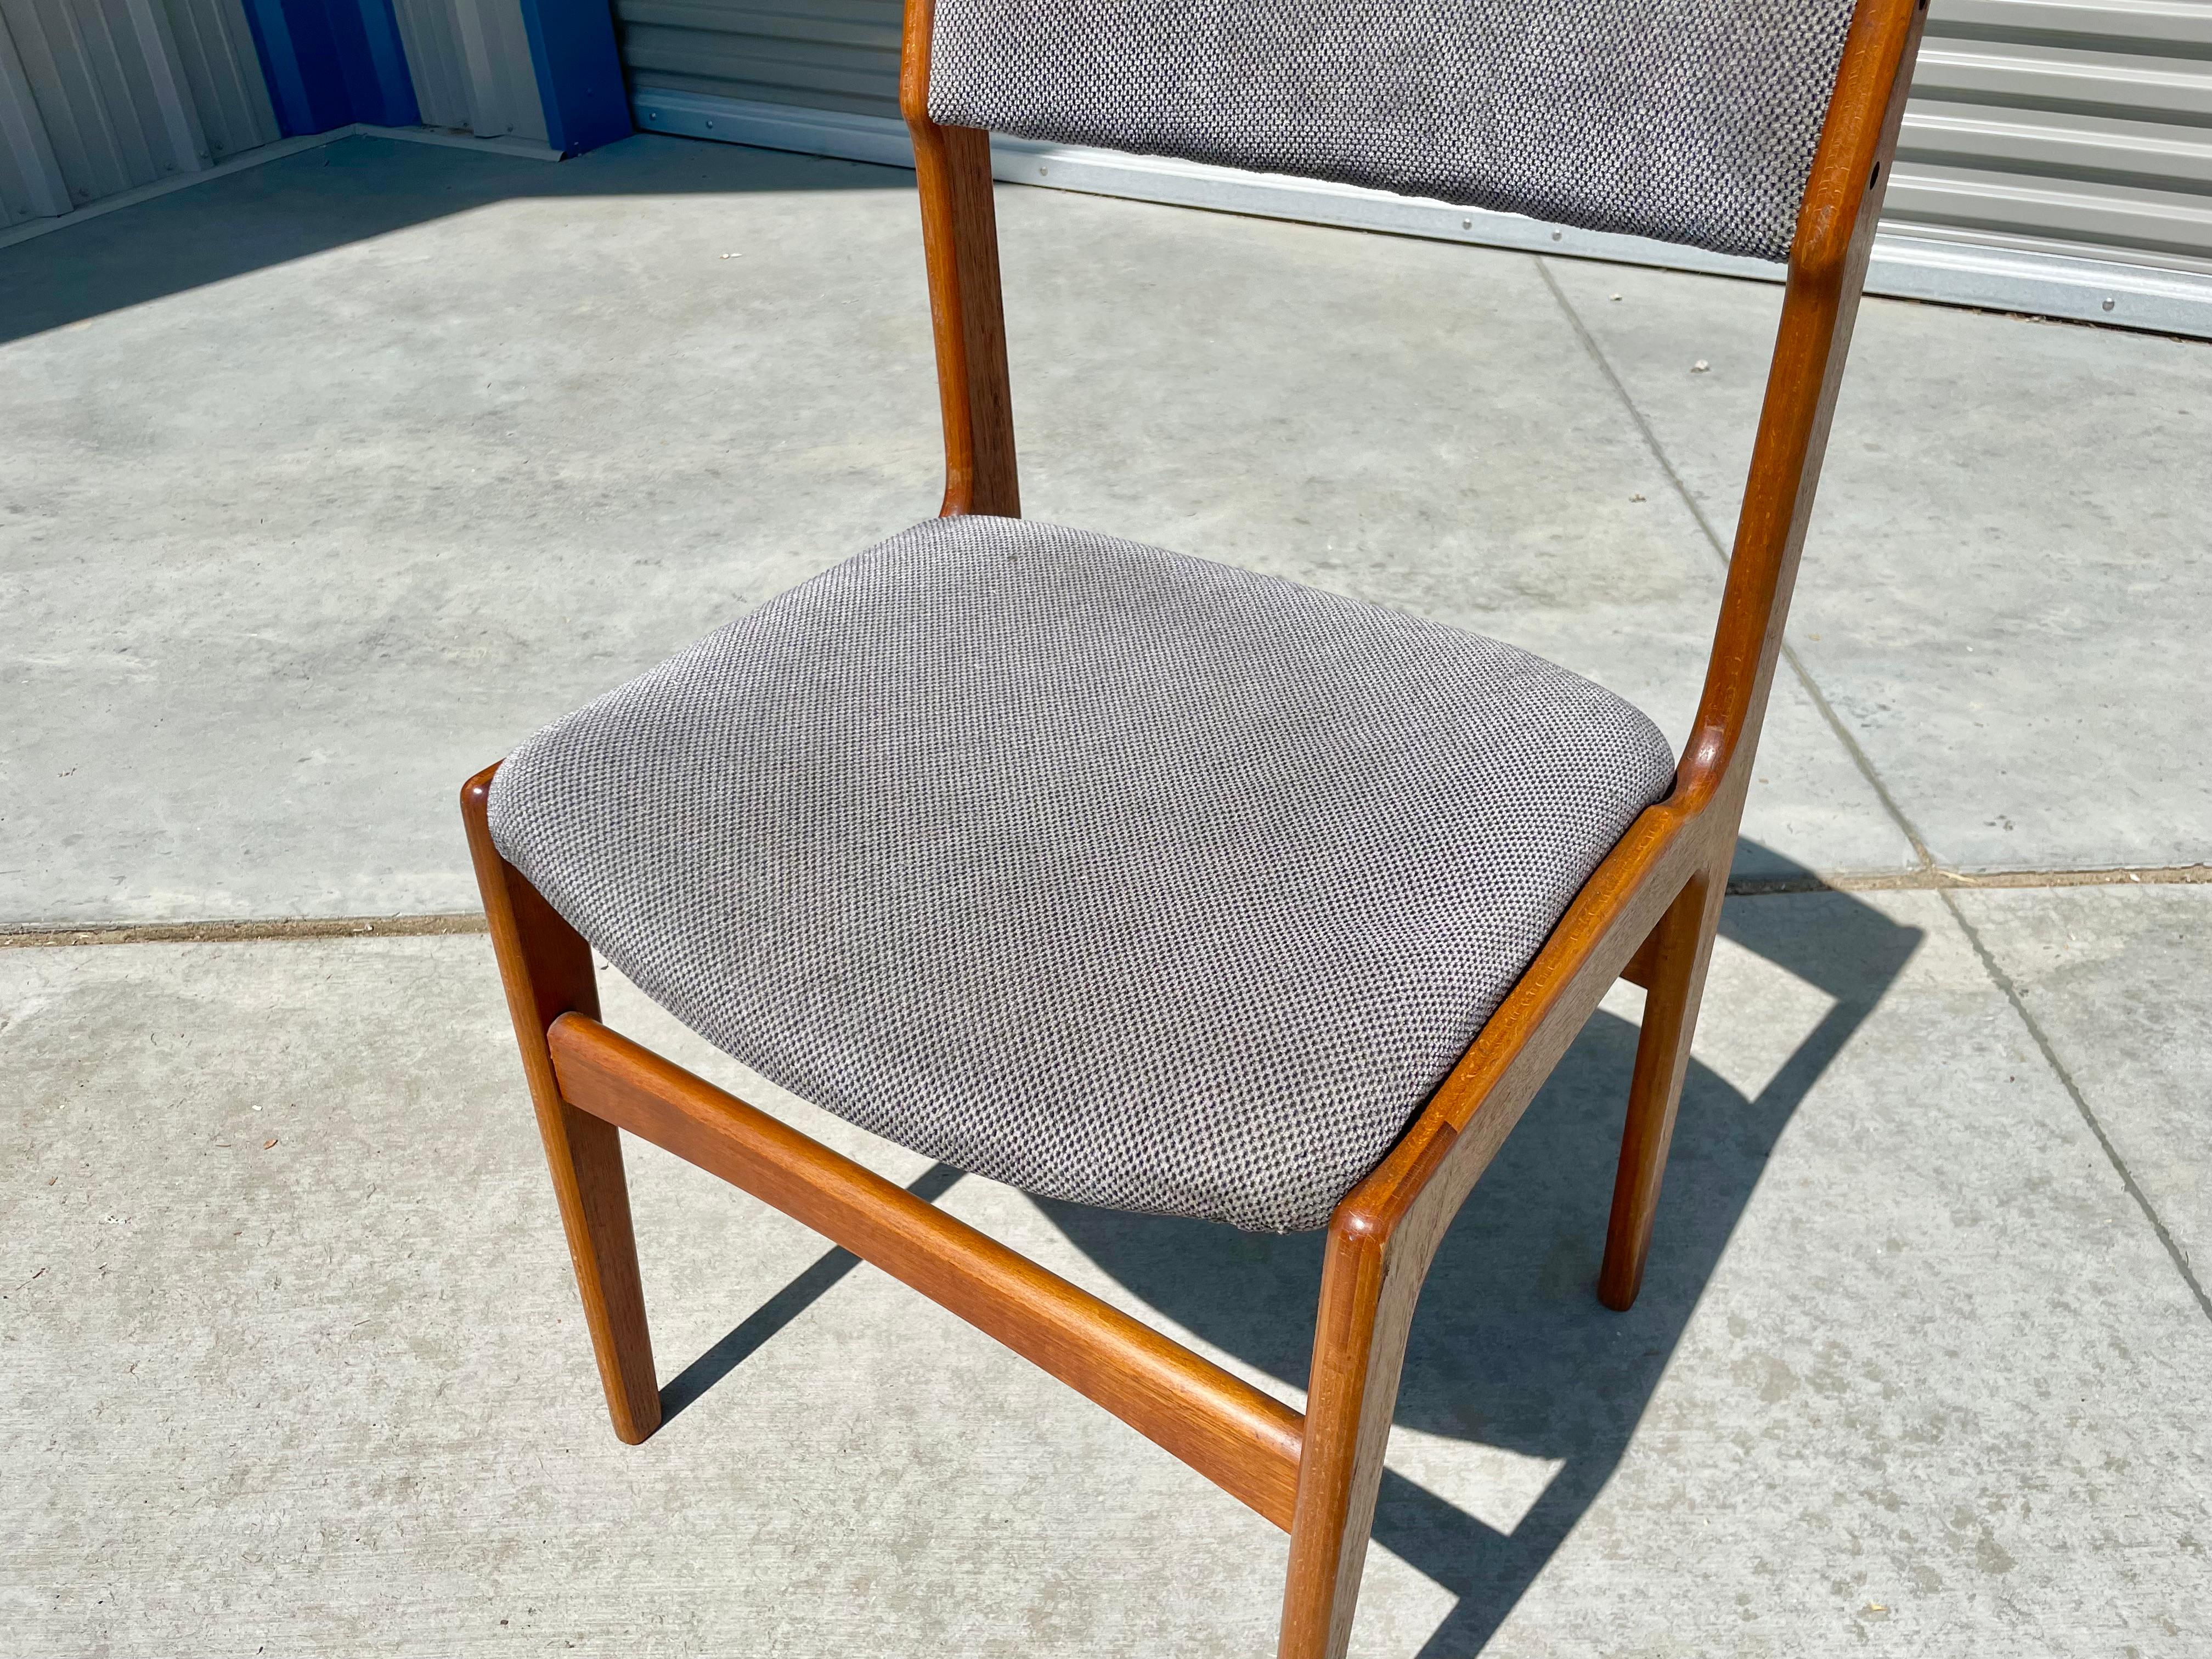 1960s Danish Modern Teak Dining Chairs - Set of 6 For Sale 7